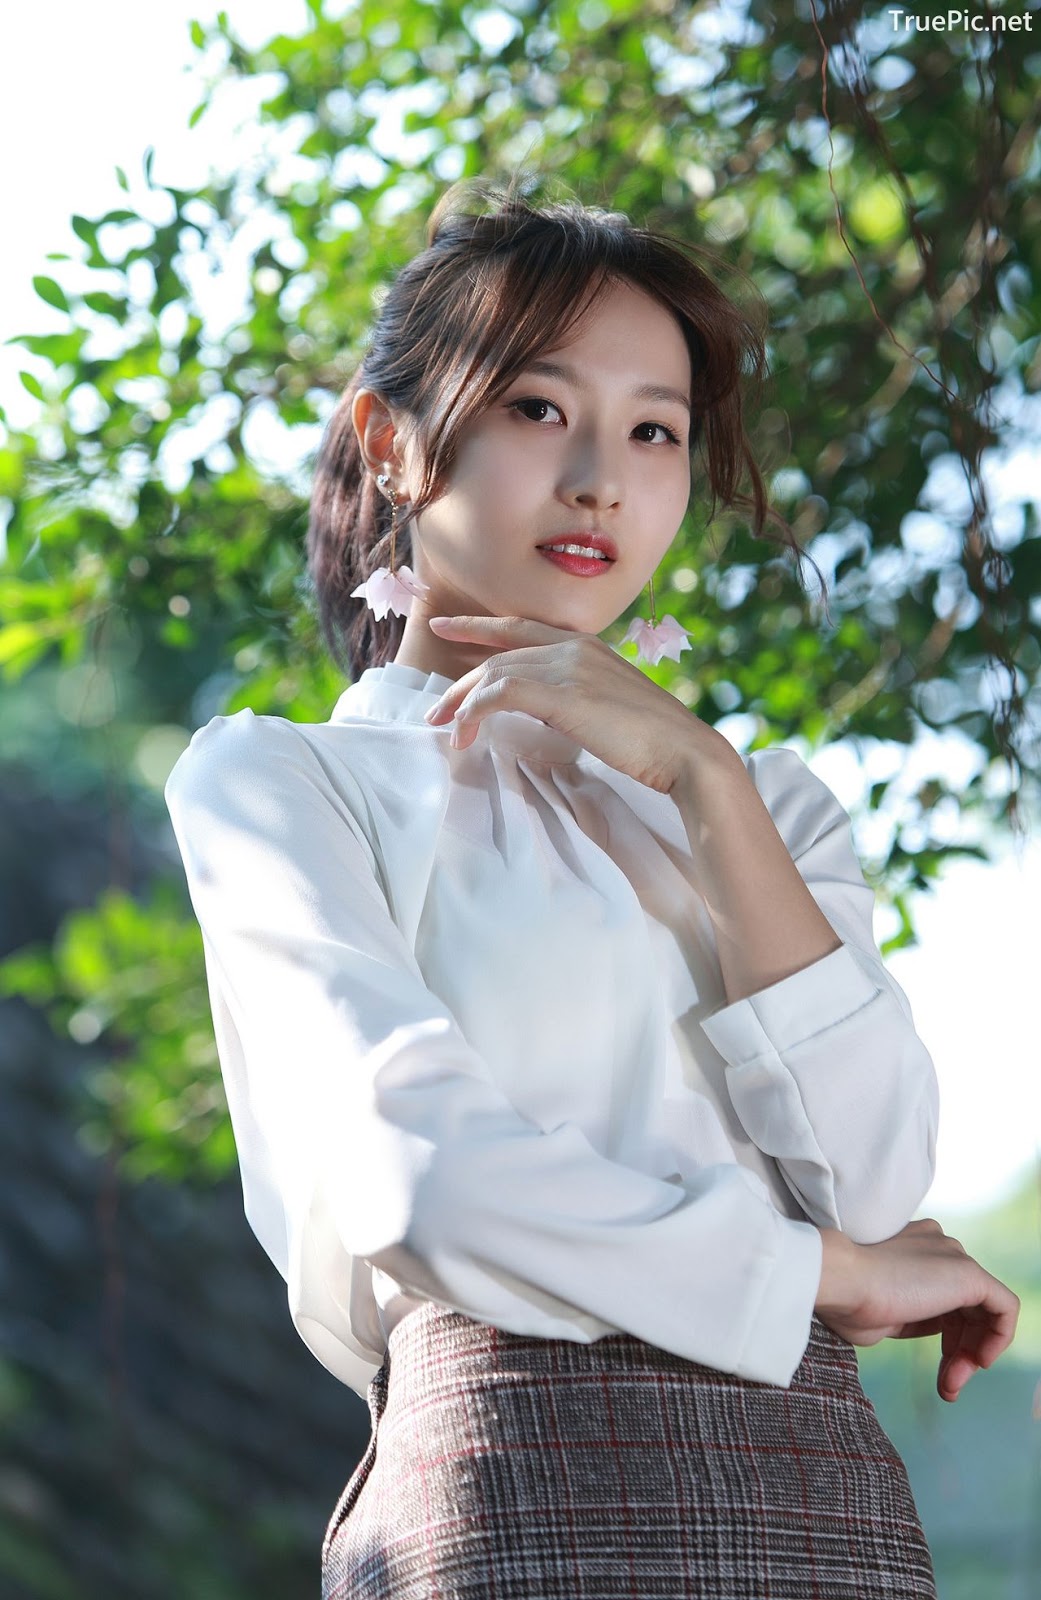 Image-Taiwanese-Model-郭思敏-Pure-And-Gorgeous-Girl-In-Office-Uniform-TruePic.net- Picture-21